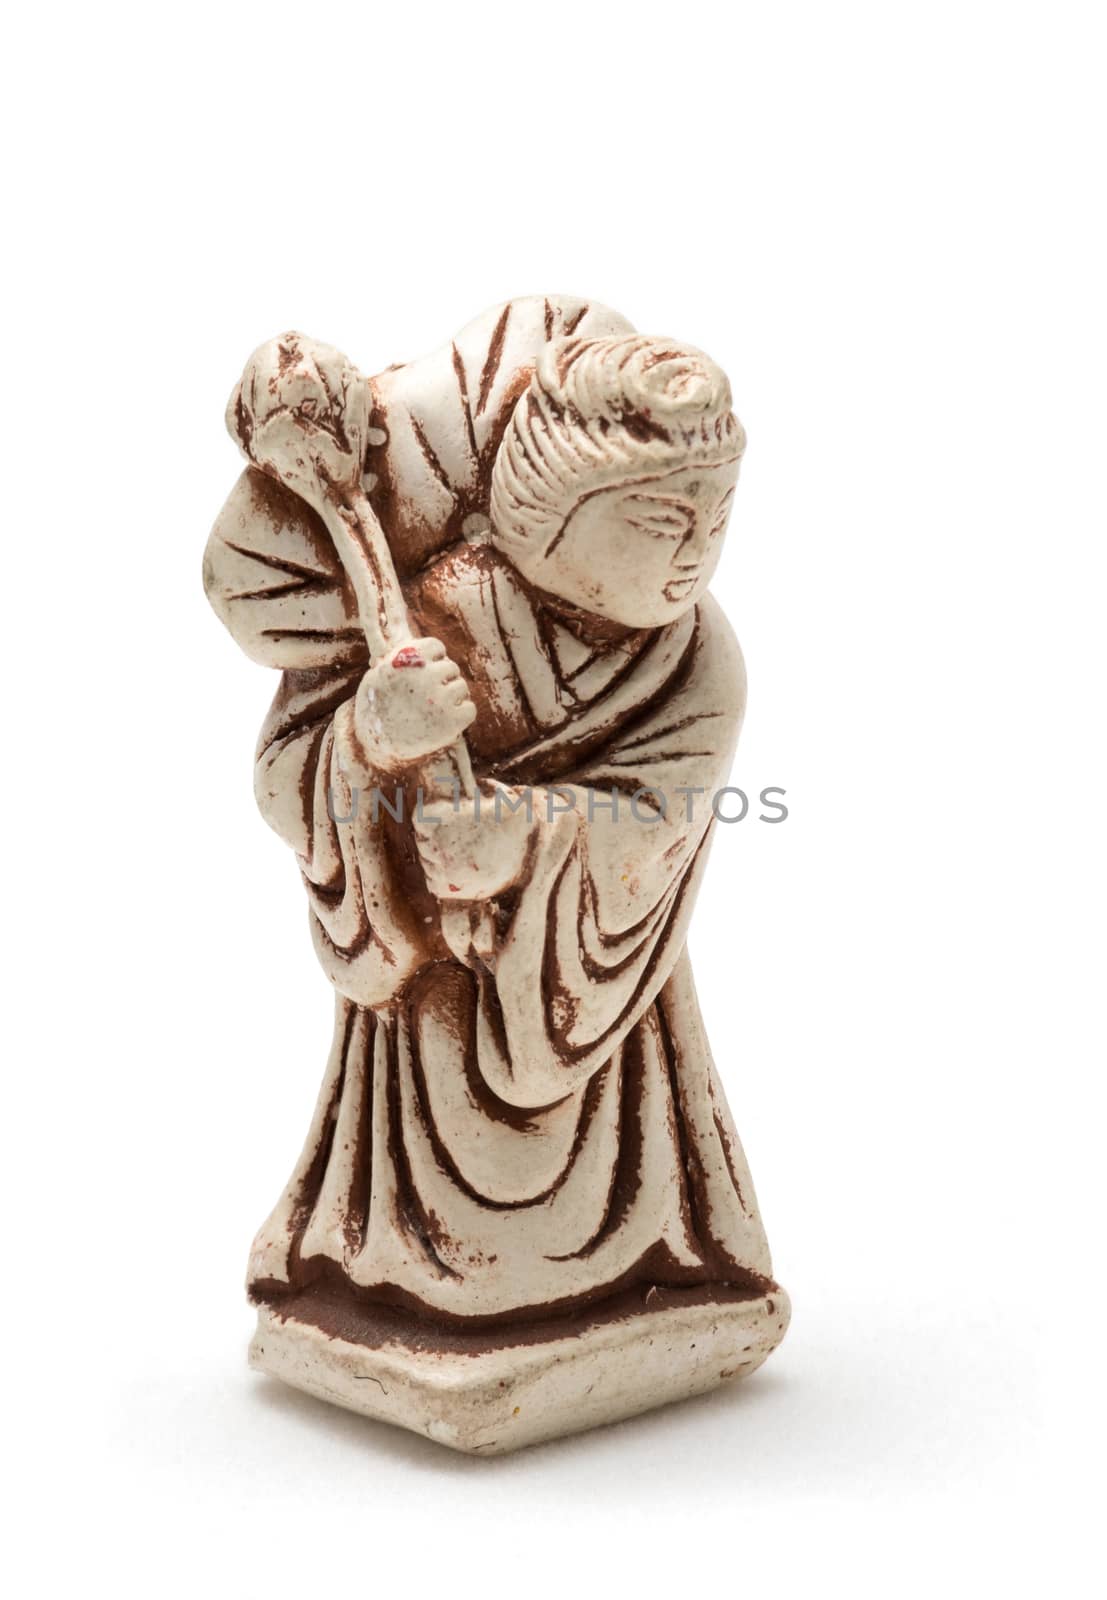 Netsuke of old woman in a dressing gown. A miniature sculpture, which was used as a button-like trinket in traditional Japanese clothes kimono kosode, which was devoid of pockets.